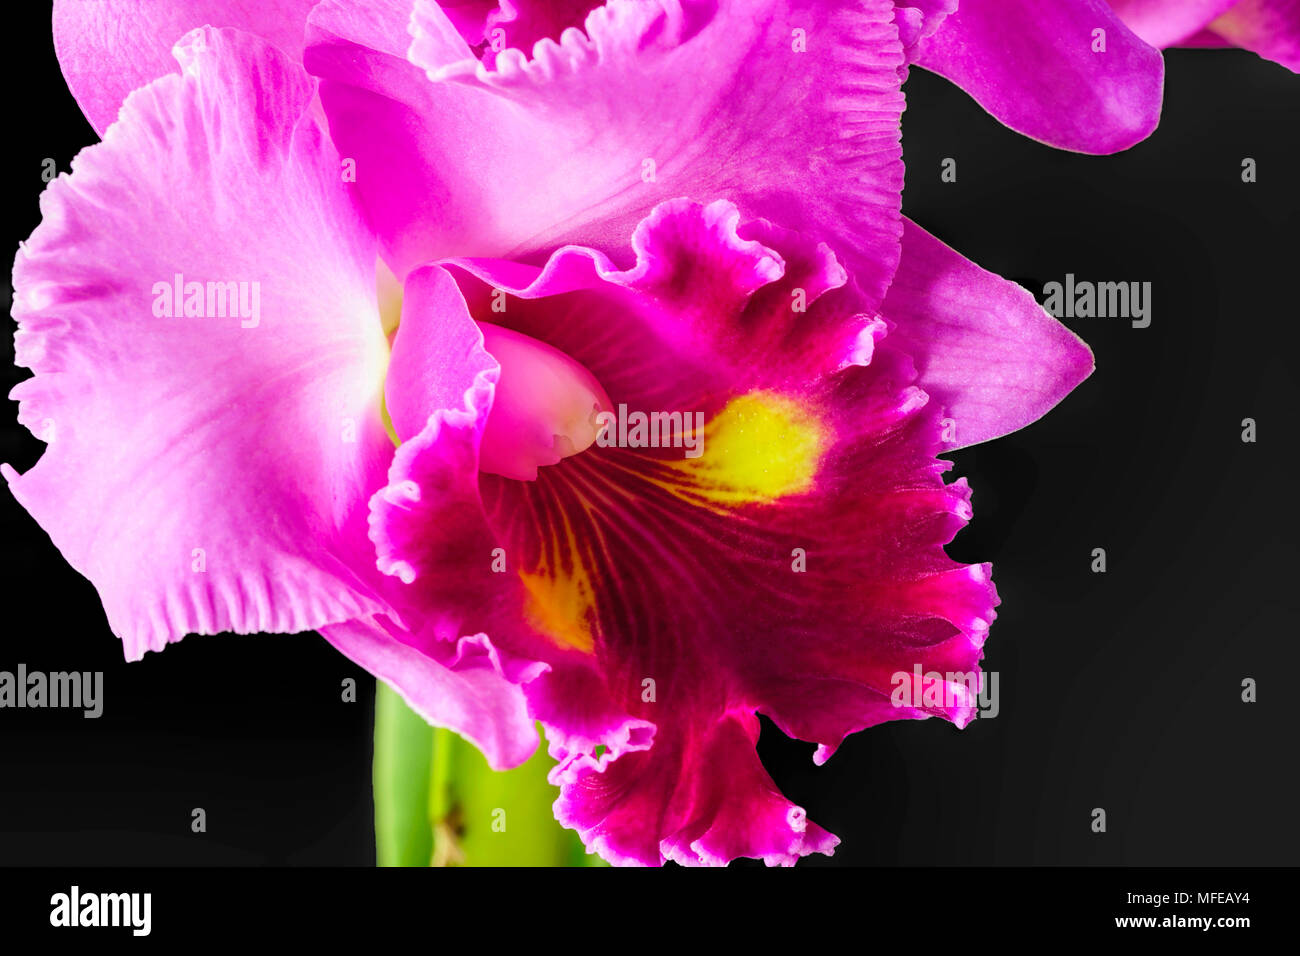 Macro photo of purple dendrobium orchid with black background Stock Photo